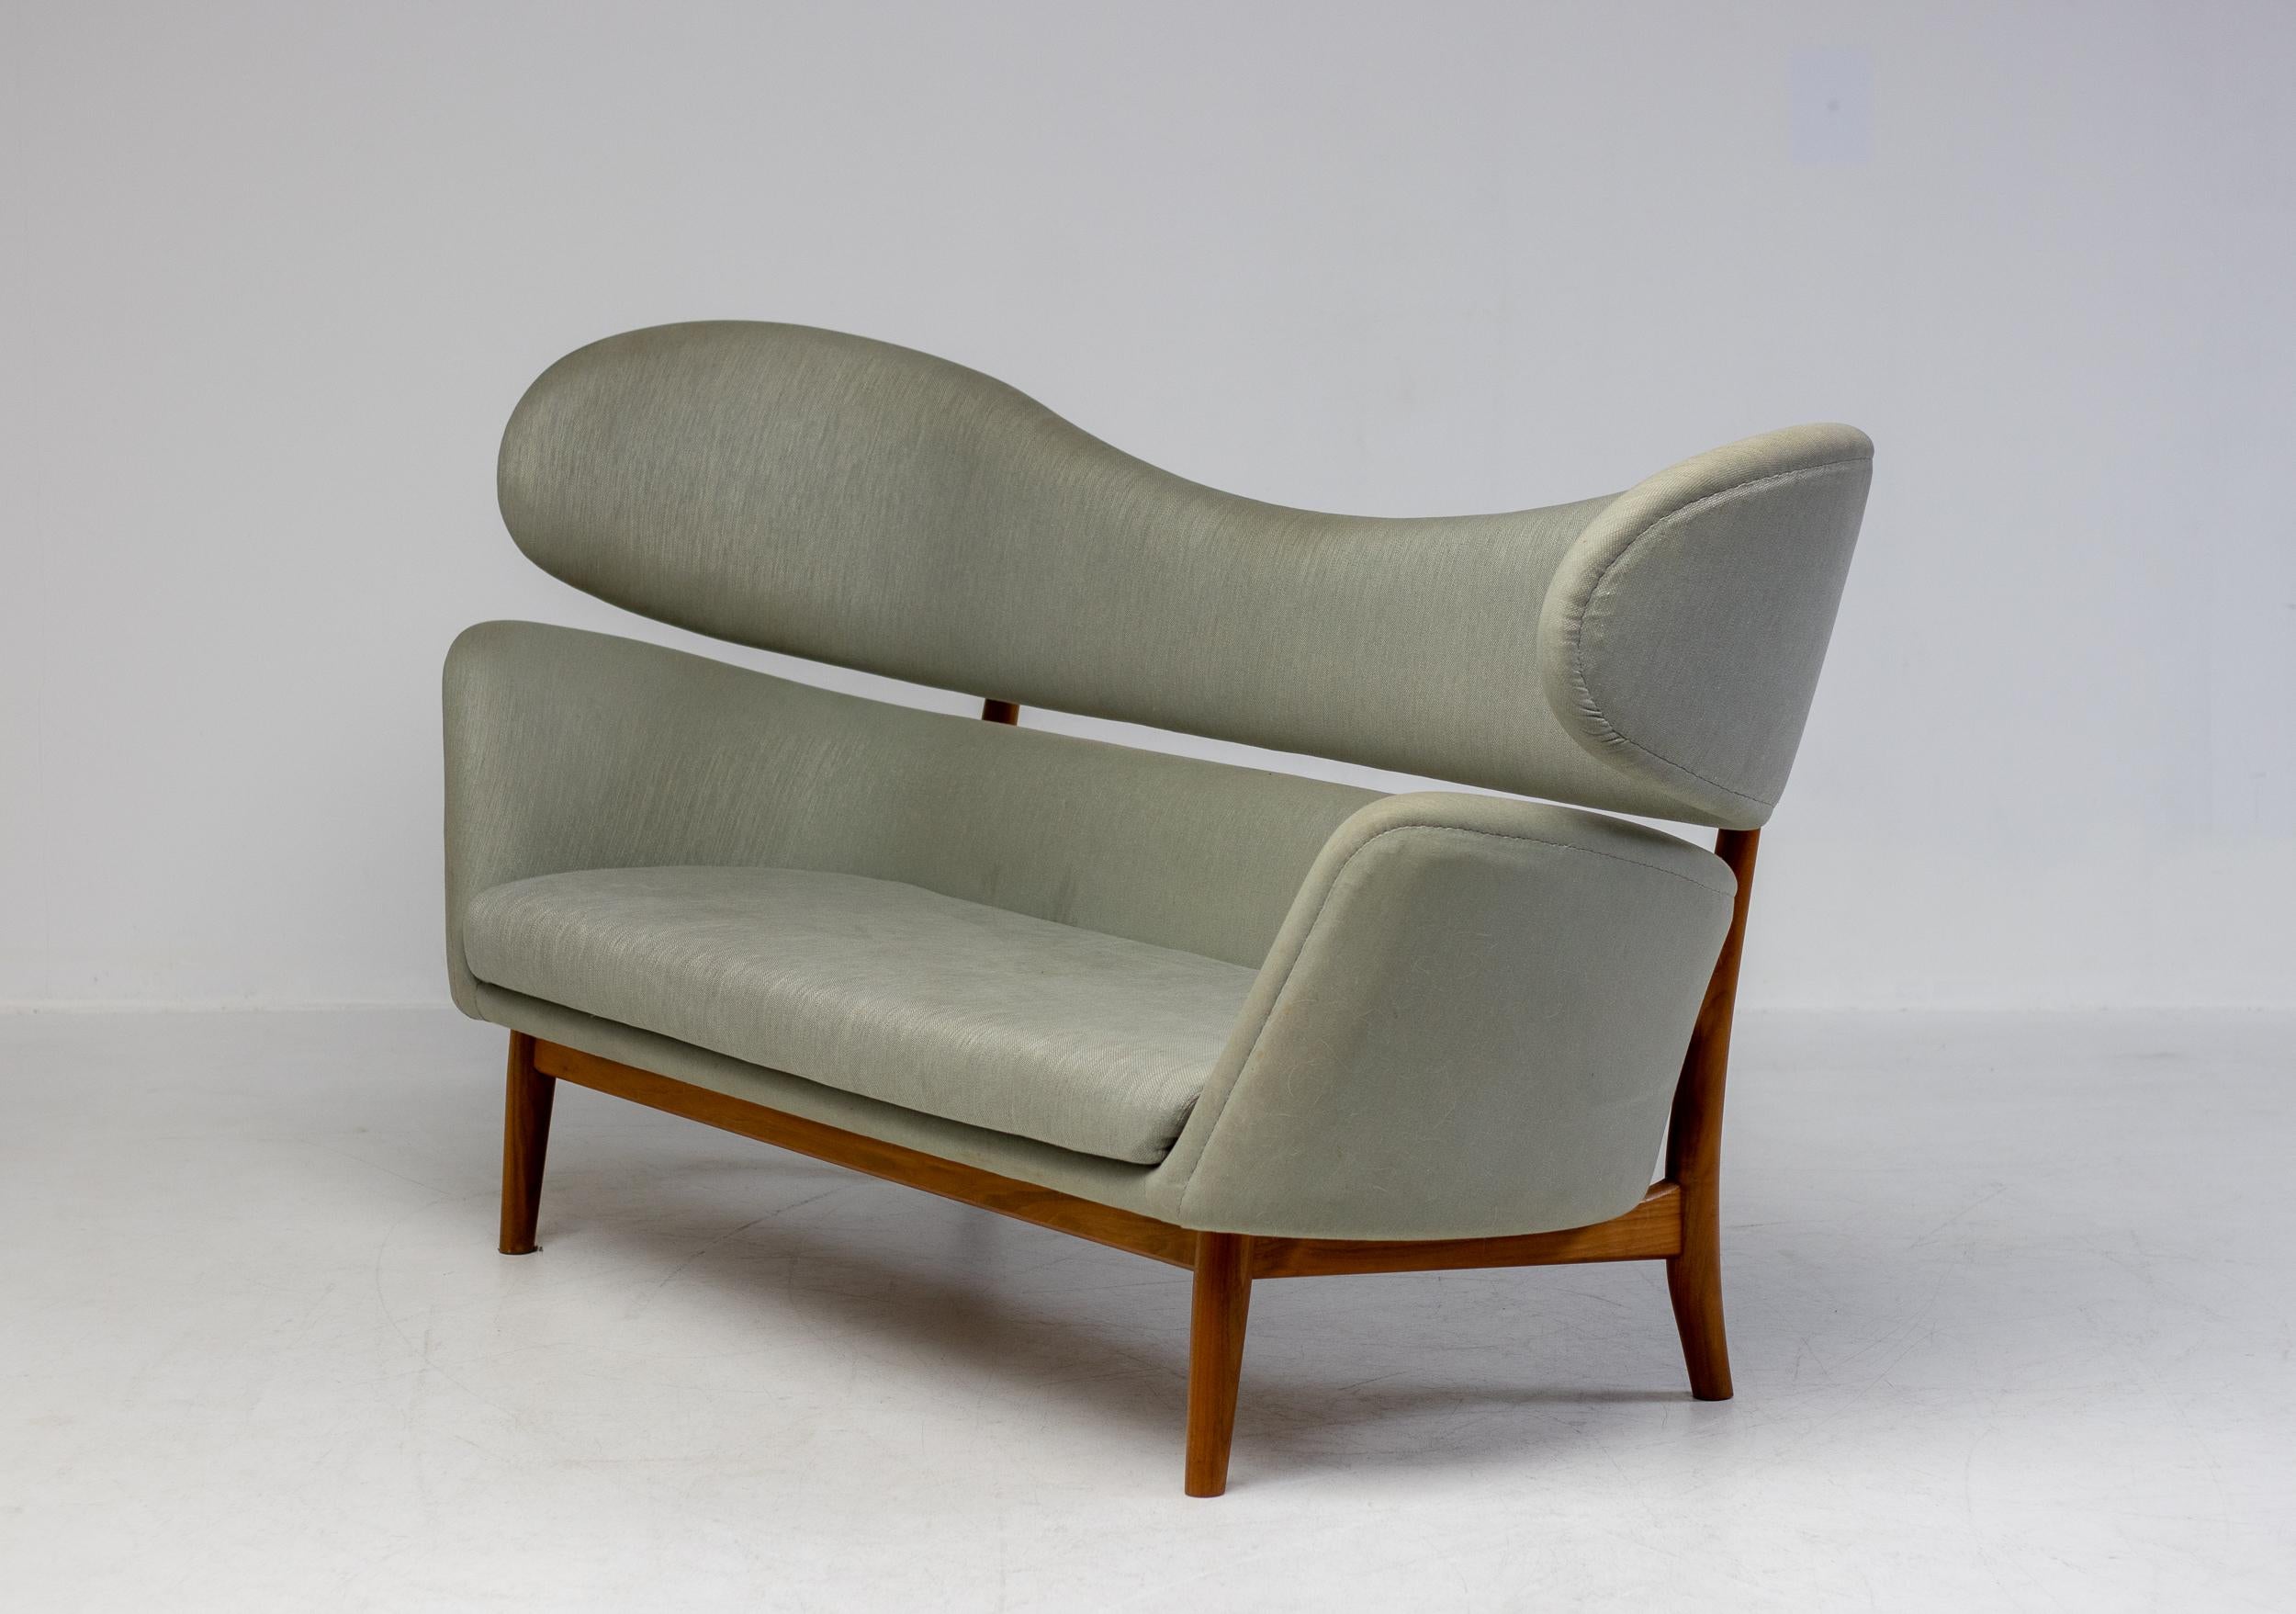 A rare and important sofa, designed by Finn Juhl in 1951 for Baker Furniture Company, Michigan. 
Introduced to the American design community by Edgar Kaufmann Jr, an art collector and director of the Industrial Design Department at the Museum of